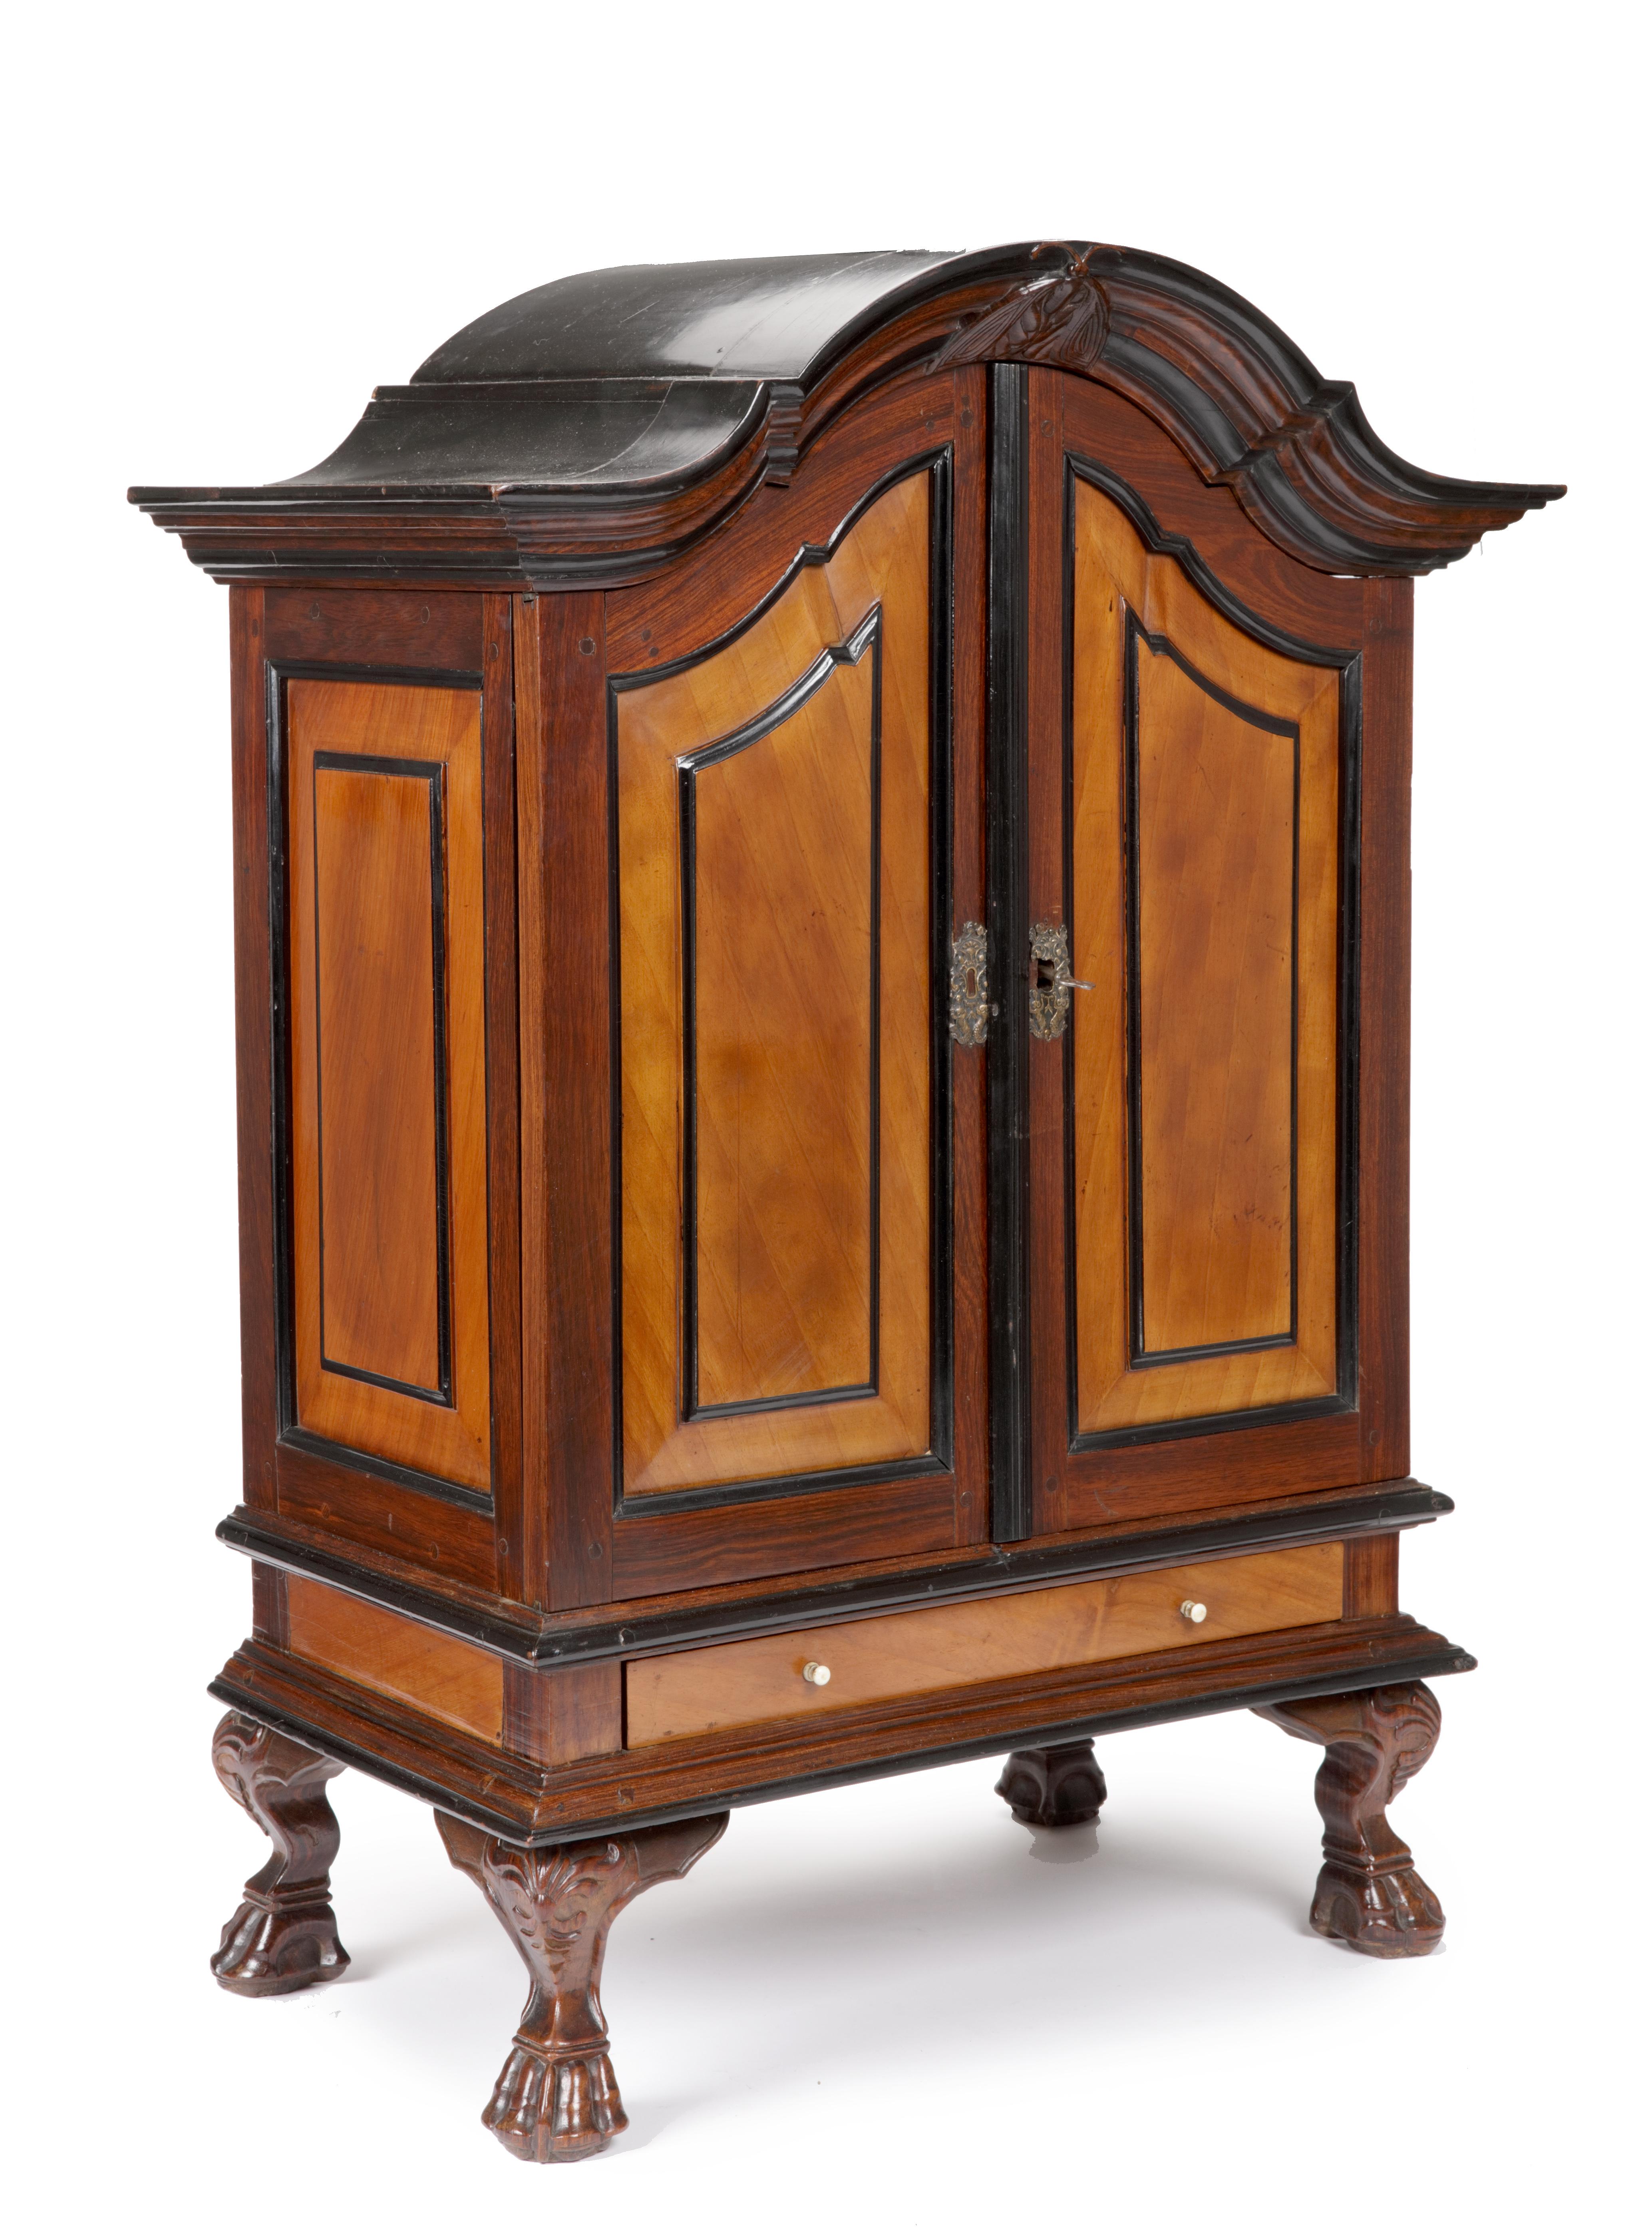 A charming satin and rosewood, ebony and teak collectors’ table-cabinet

Sri Lanka, second half of the 18th century

Measures: H. 86.5 x W. 62.5 x D. 34.7 cm

In the top of the shaped cornice, there is a carving of a butterfly or moth. Under